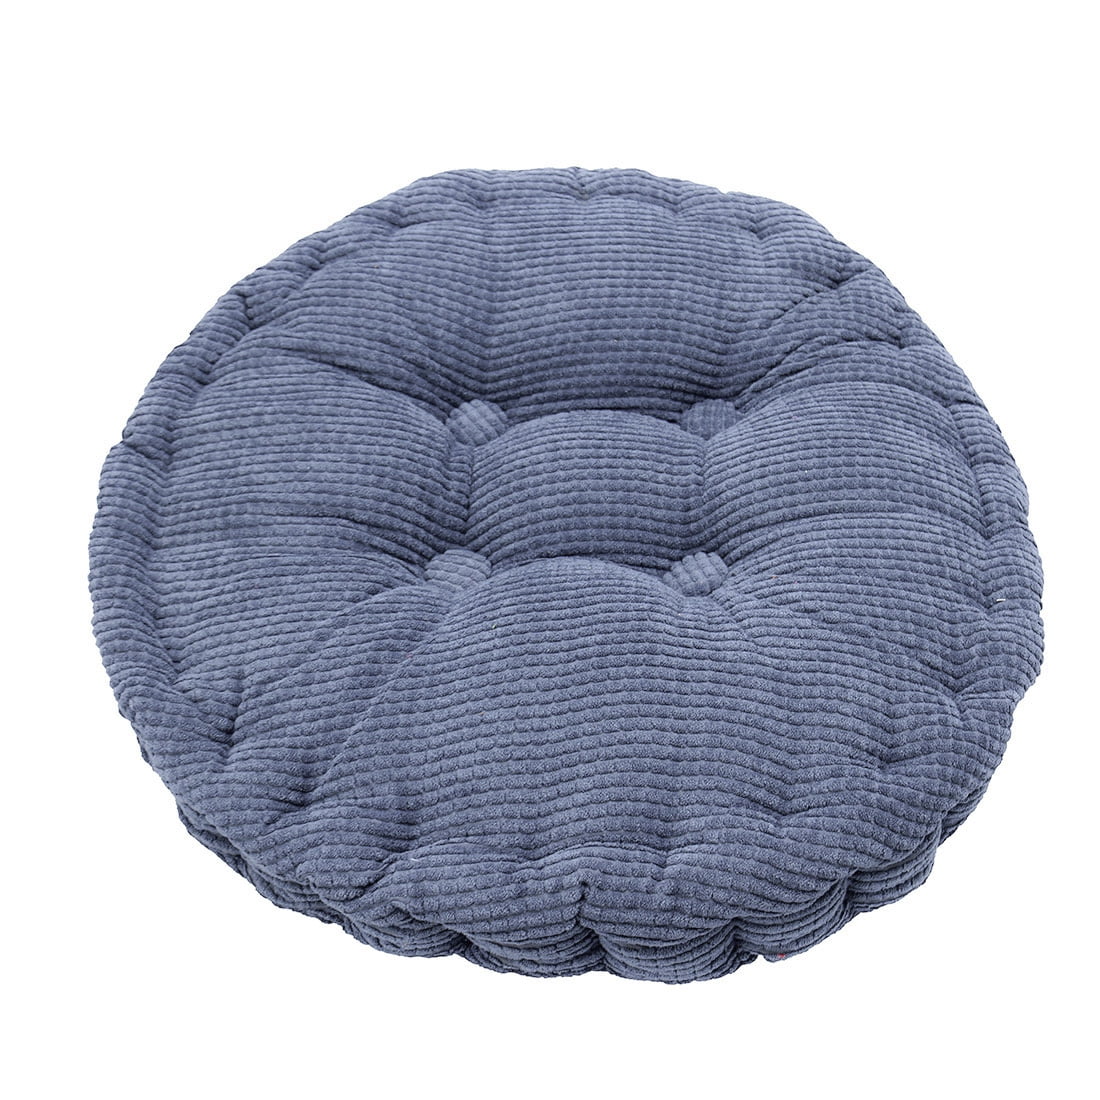 Details about   Seat Cushion Pad Cushion Thicken 16" Round Square Floor Window Cotton Chair Pad